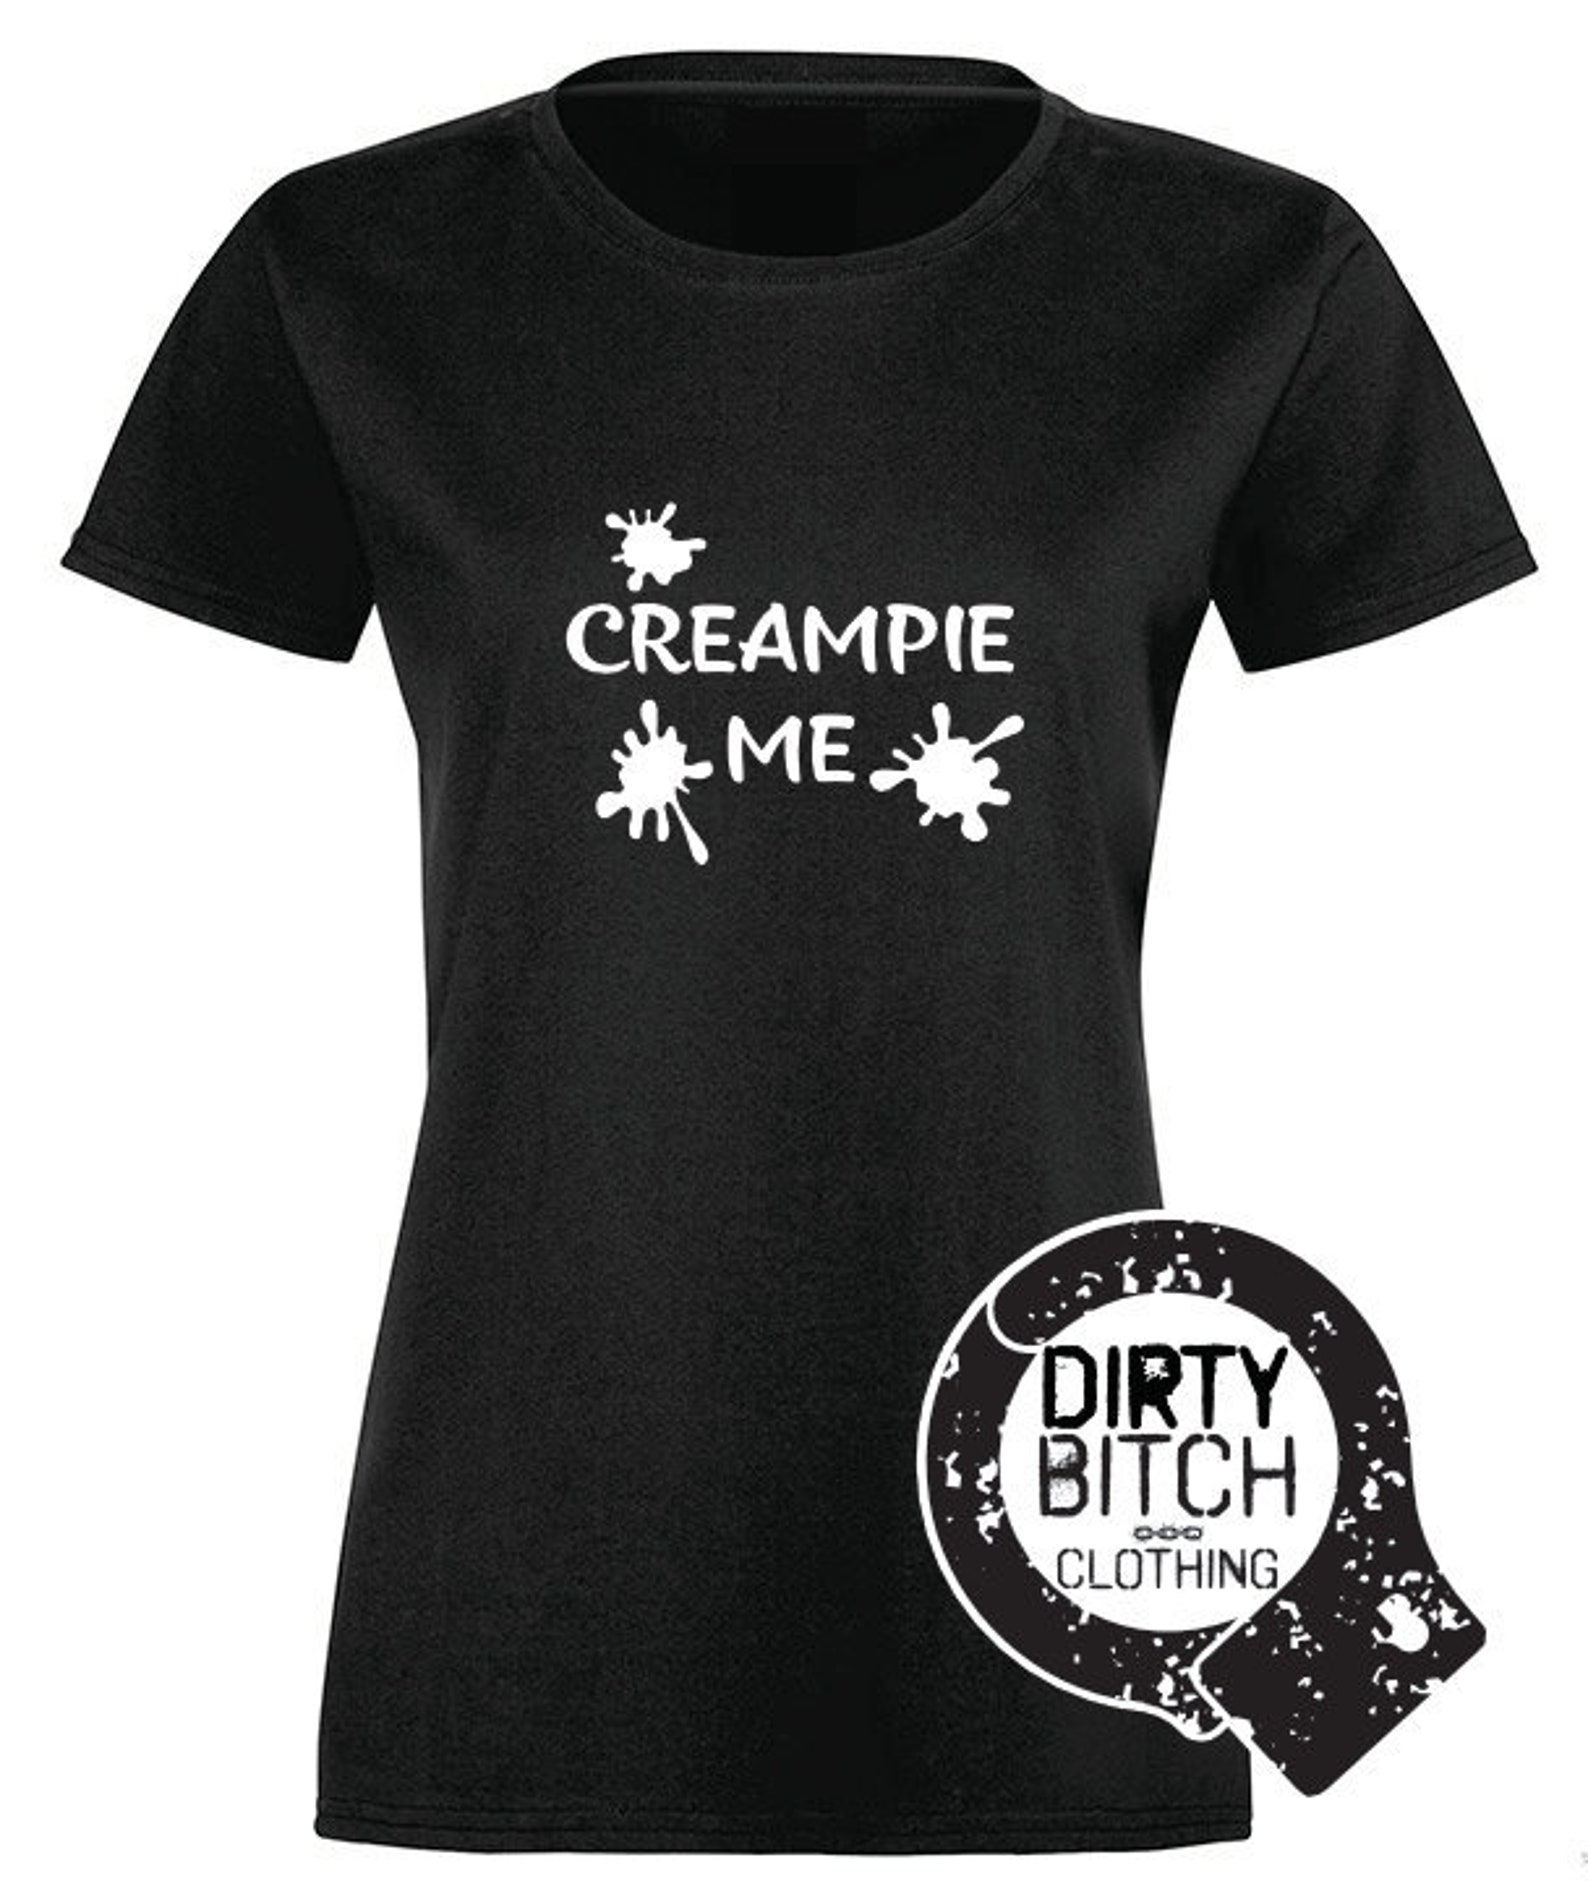 Creampie Me Adult T-shirt Clothing Boobs Hotwife Cuckold - Etsy